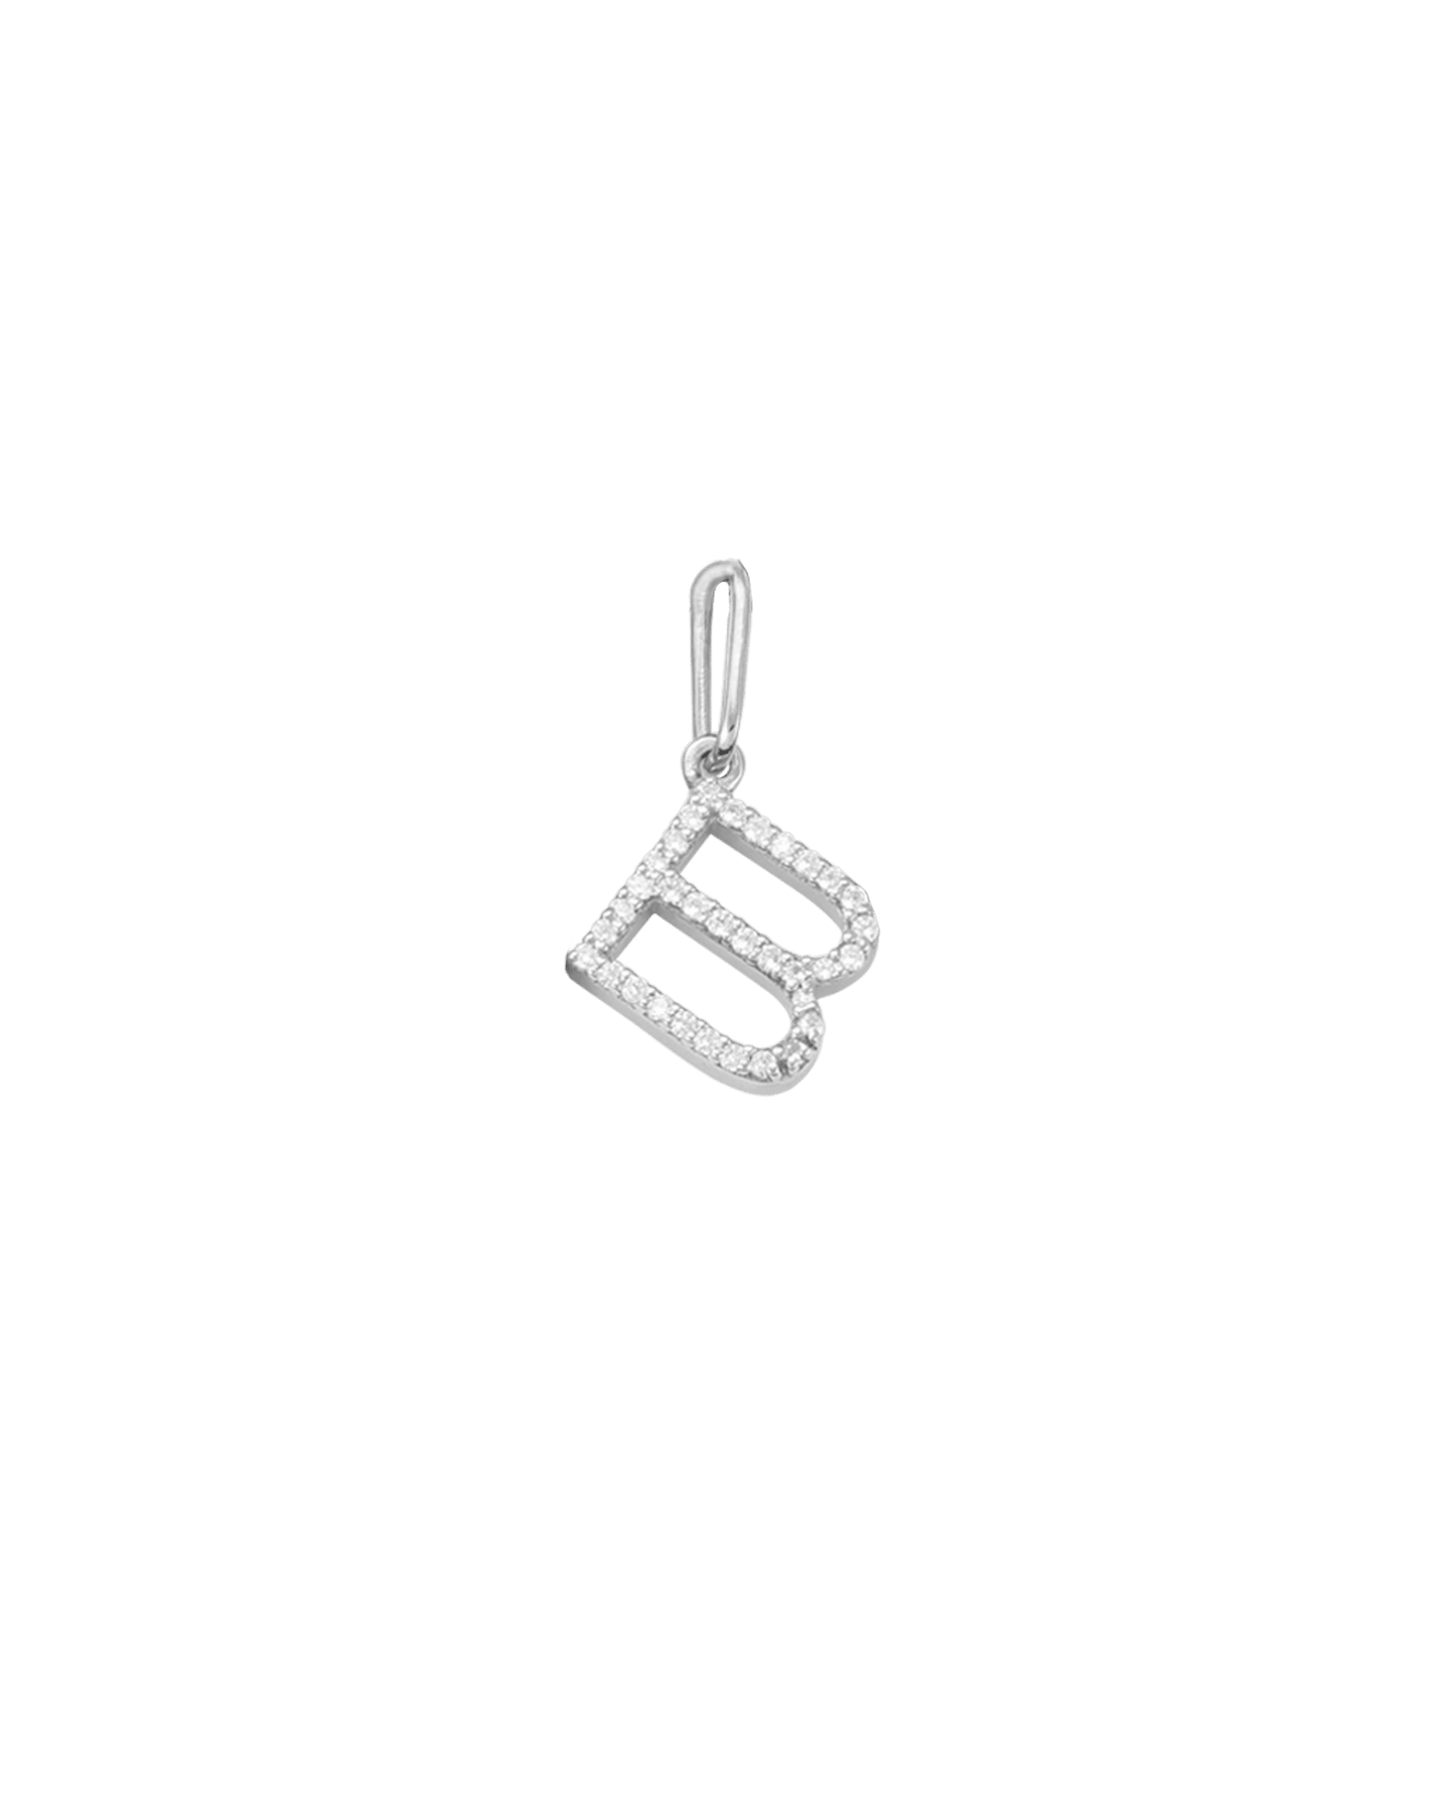 Frosted Charm - 14K White Gold Charm magal-dev 